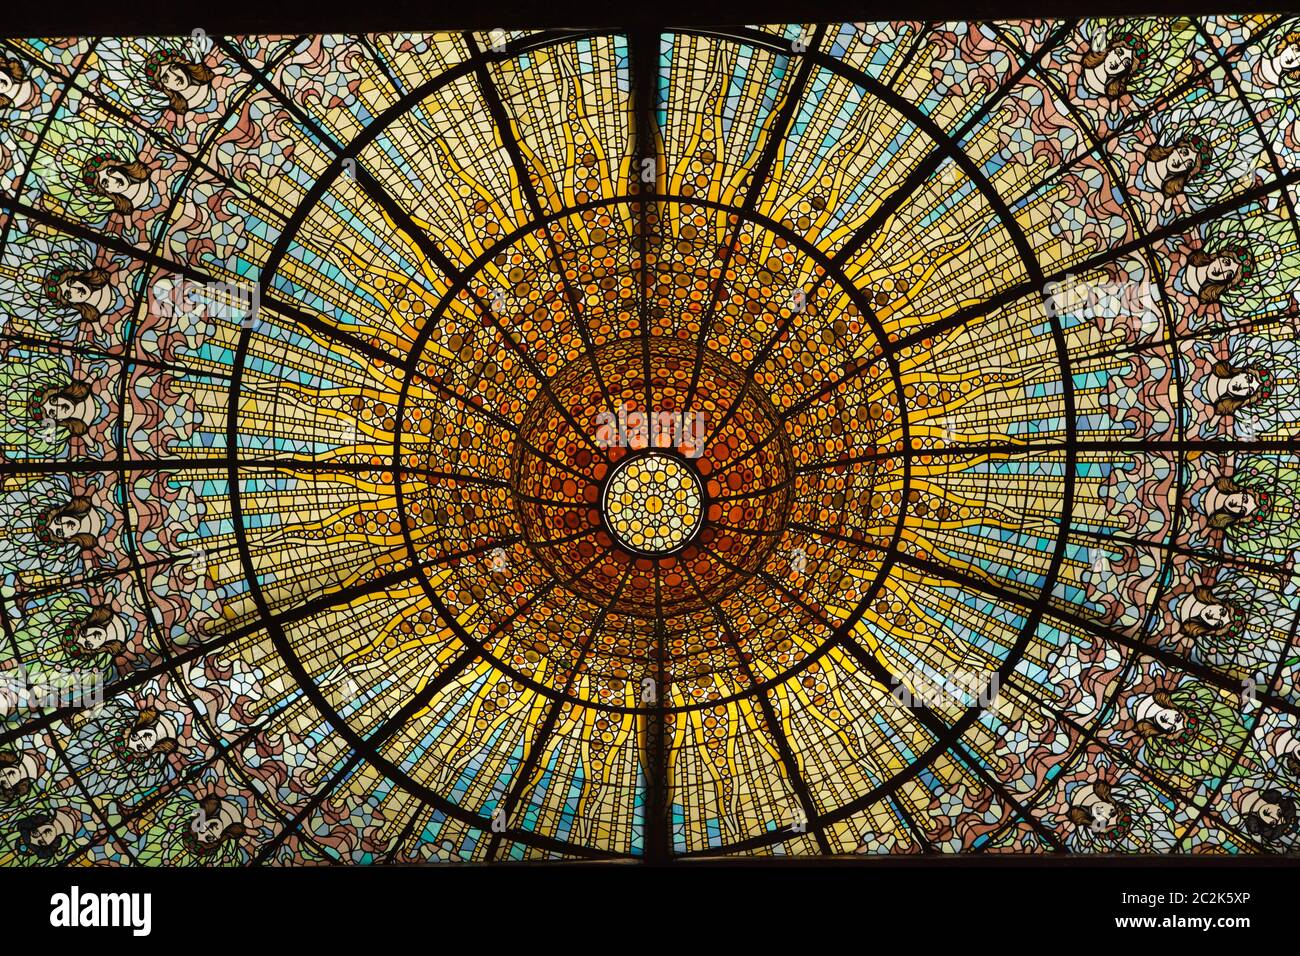 Stained-glass skylight in the main concert hall of the Palace of Catalan Music (Palau de la Música Catalana) in Barcelona, Catalonia, Spain. The concert hall designed by Catalan modernist architect Lluís Domènech i Montaner was constructed between 1902 and 1906. The enormous stained-glass skylight was designed by Catalan modernist artist Antoni Rigalt i Blanch. Stock Photo